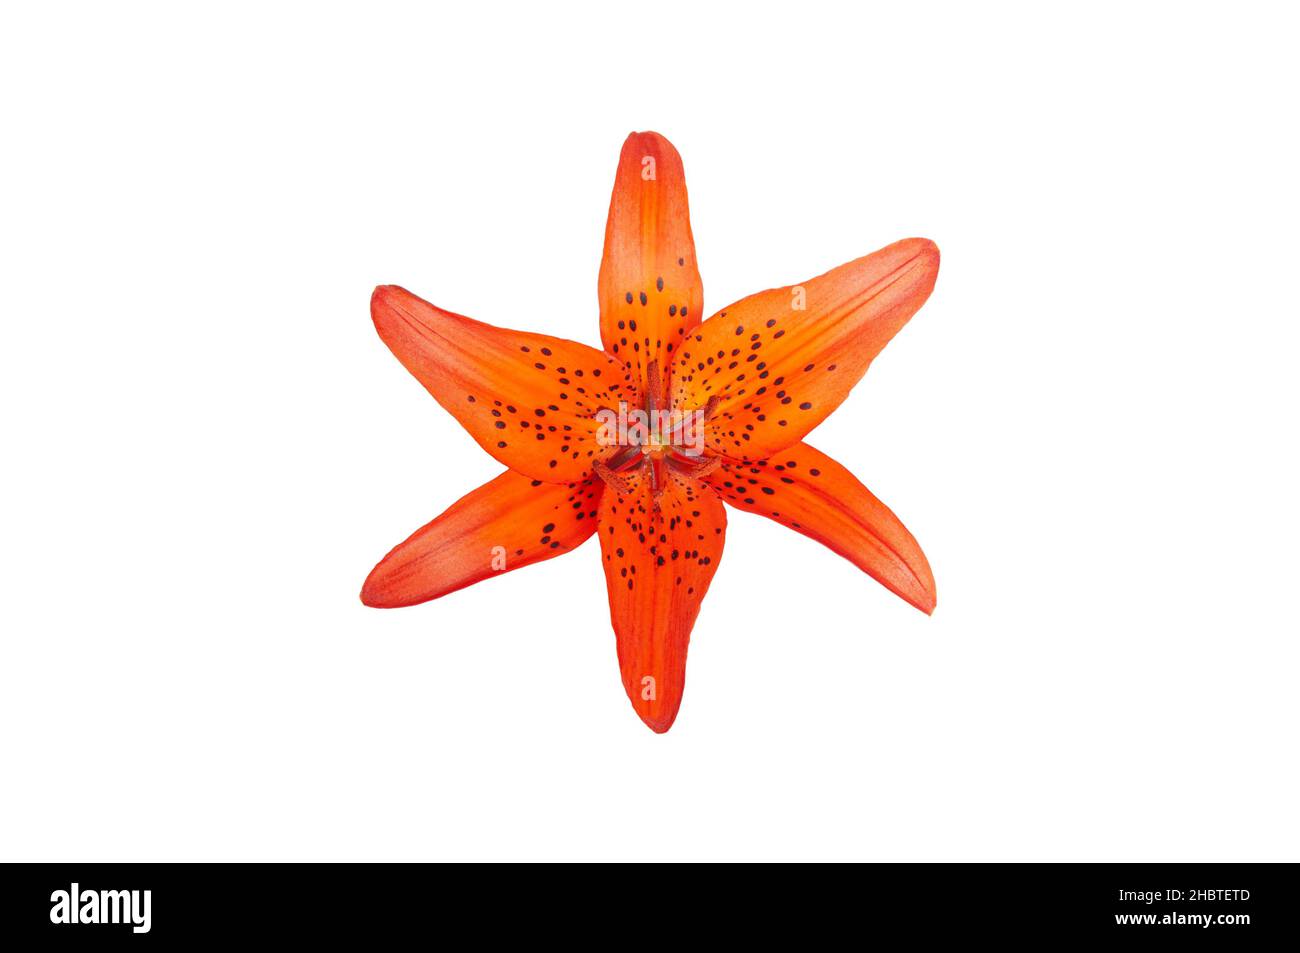 Orange lily blossom isolated on a white background Stock Photo